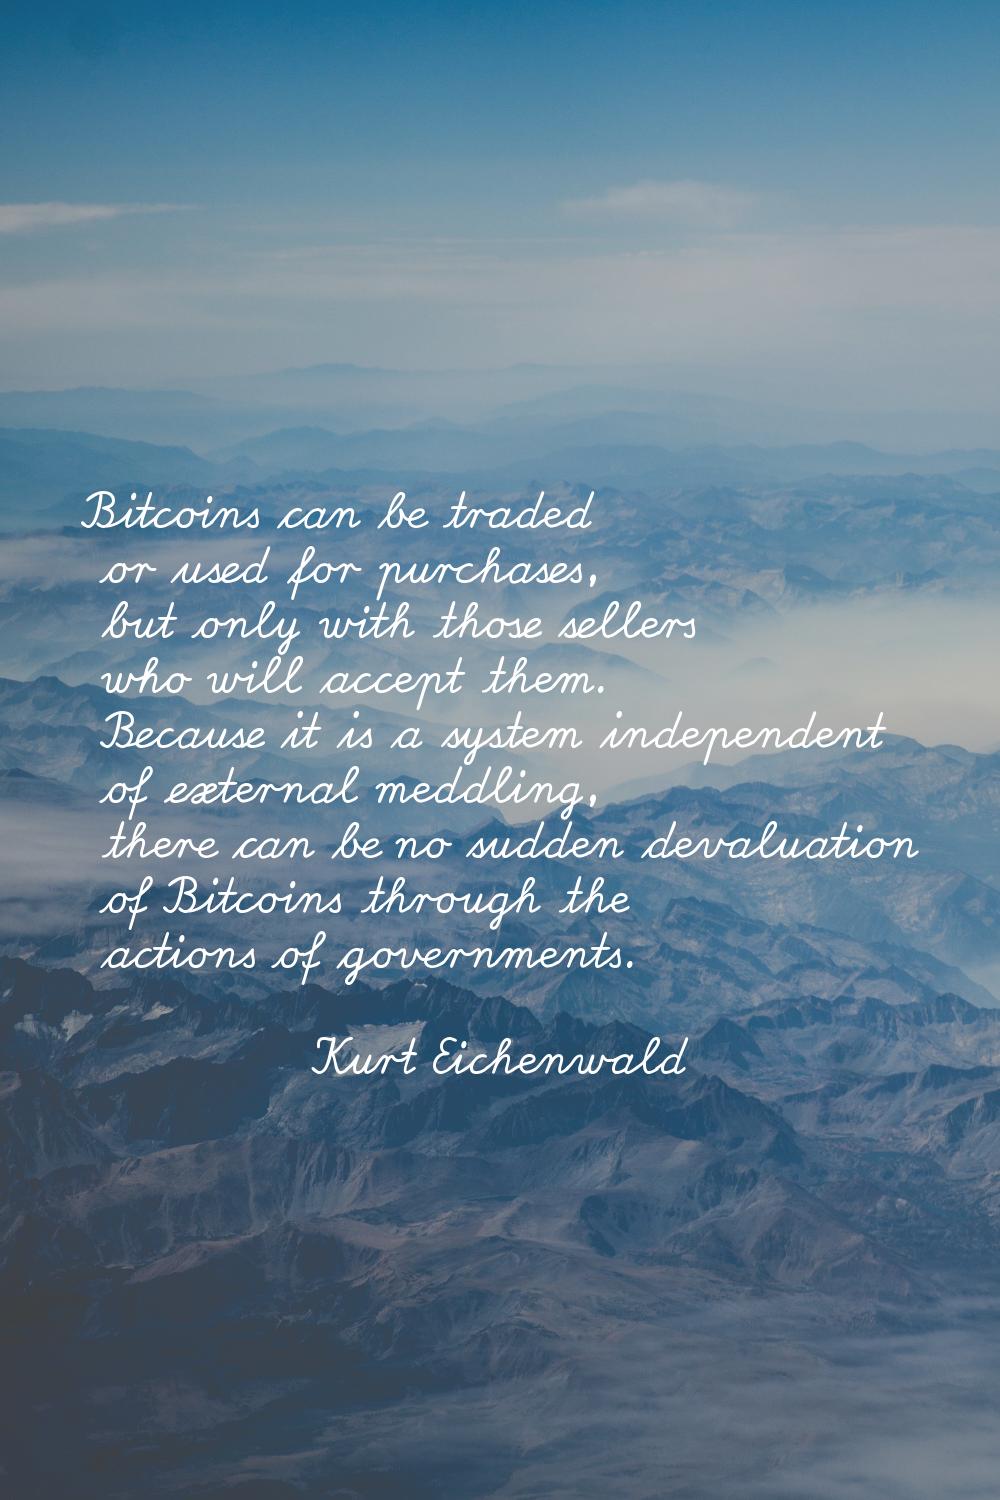 Bitcoins can be traded or used for purchases, but only with those sellers who will accept them. Bec